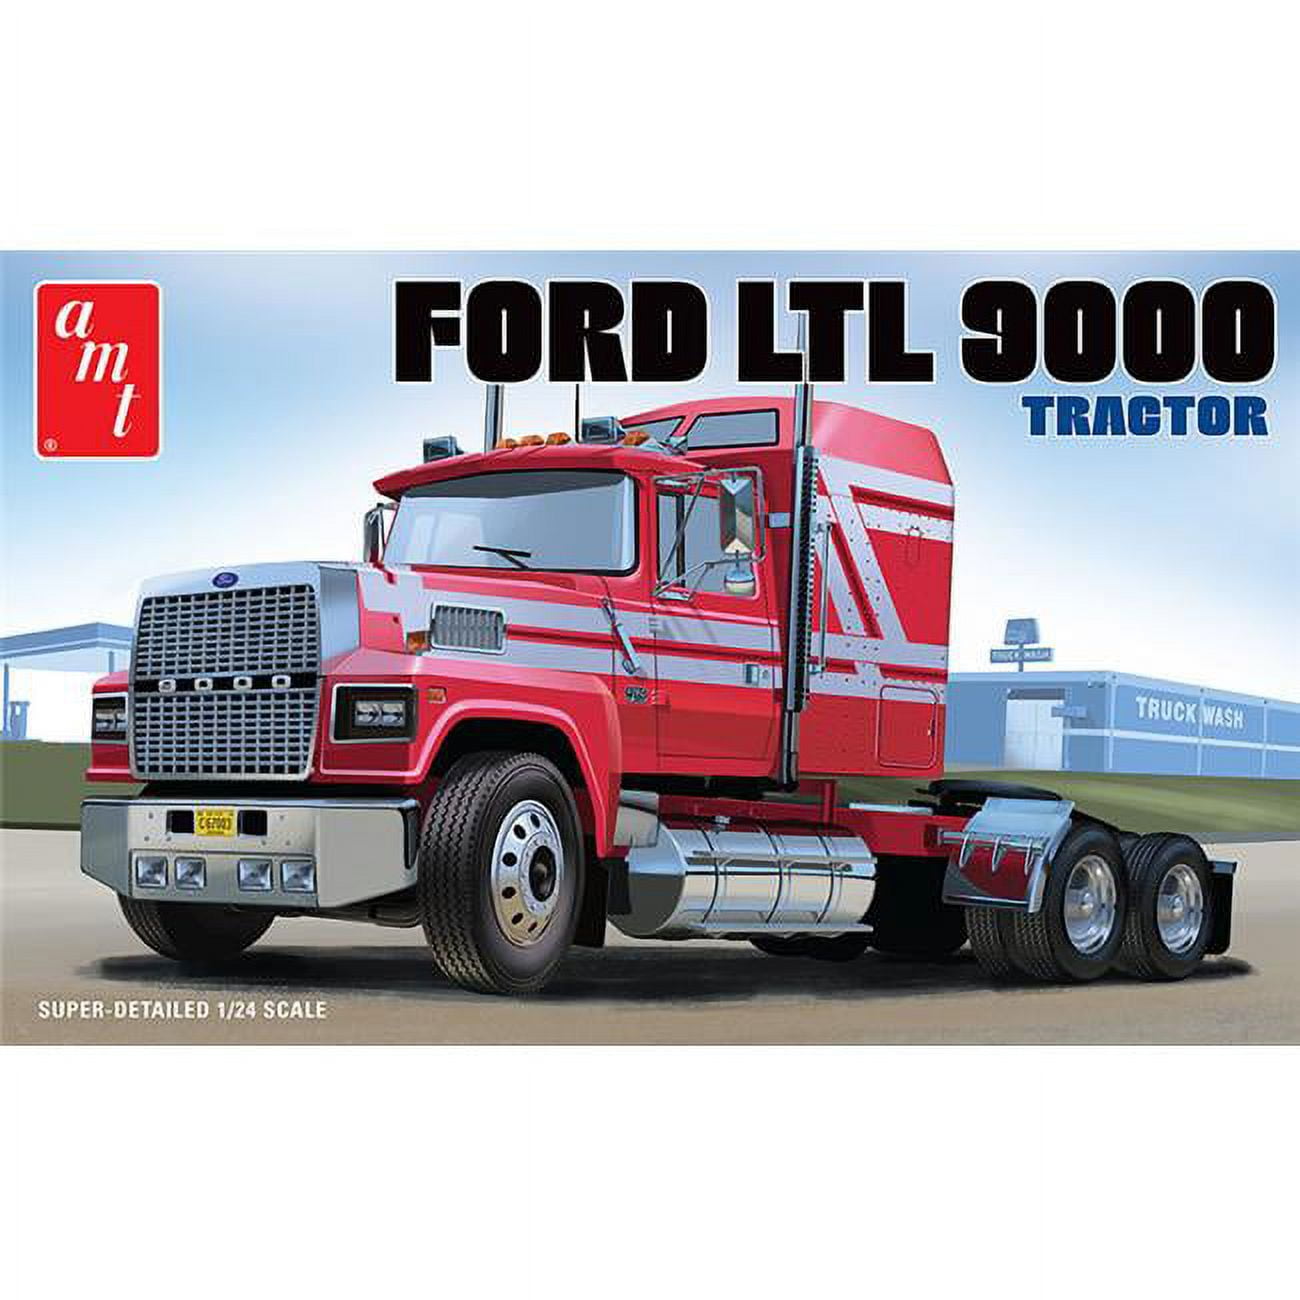 Picture of AMT AMT1238 1 by 24 Scale Plastic Model Kit for Ford LTL 9000 Semi Tractor